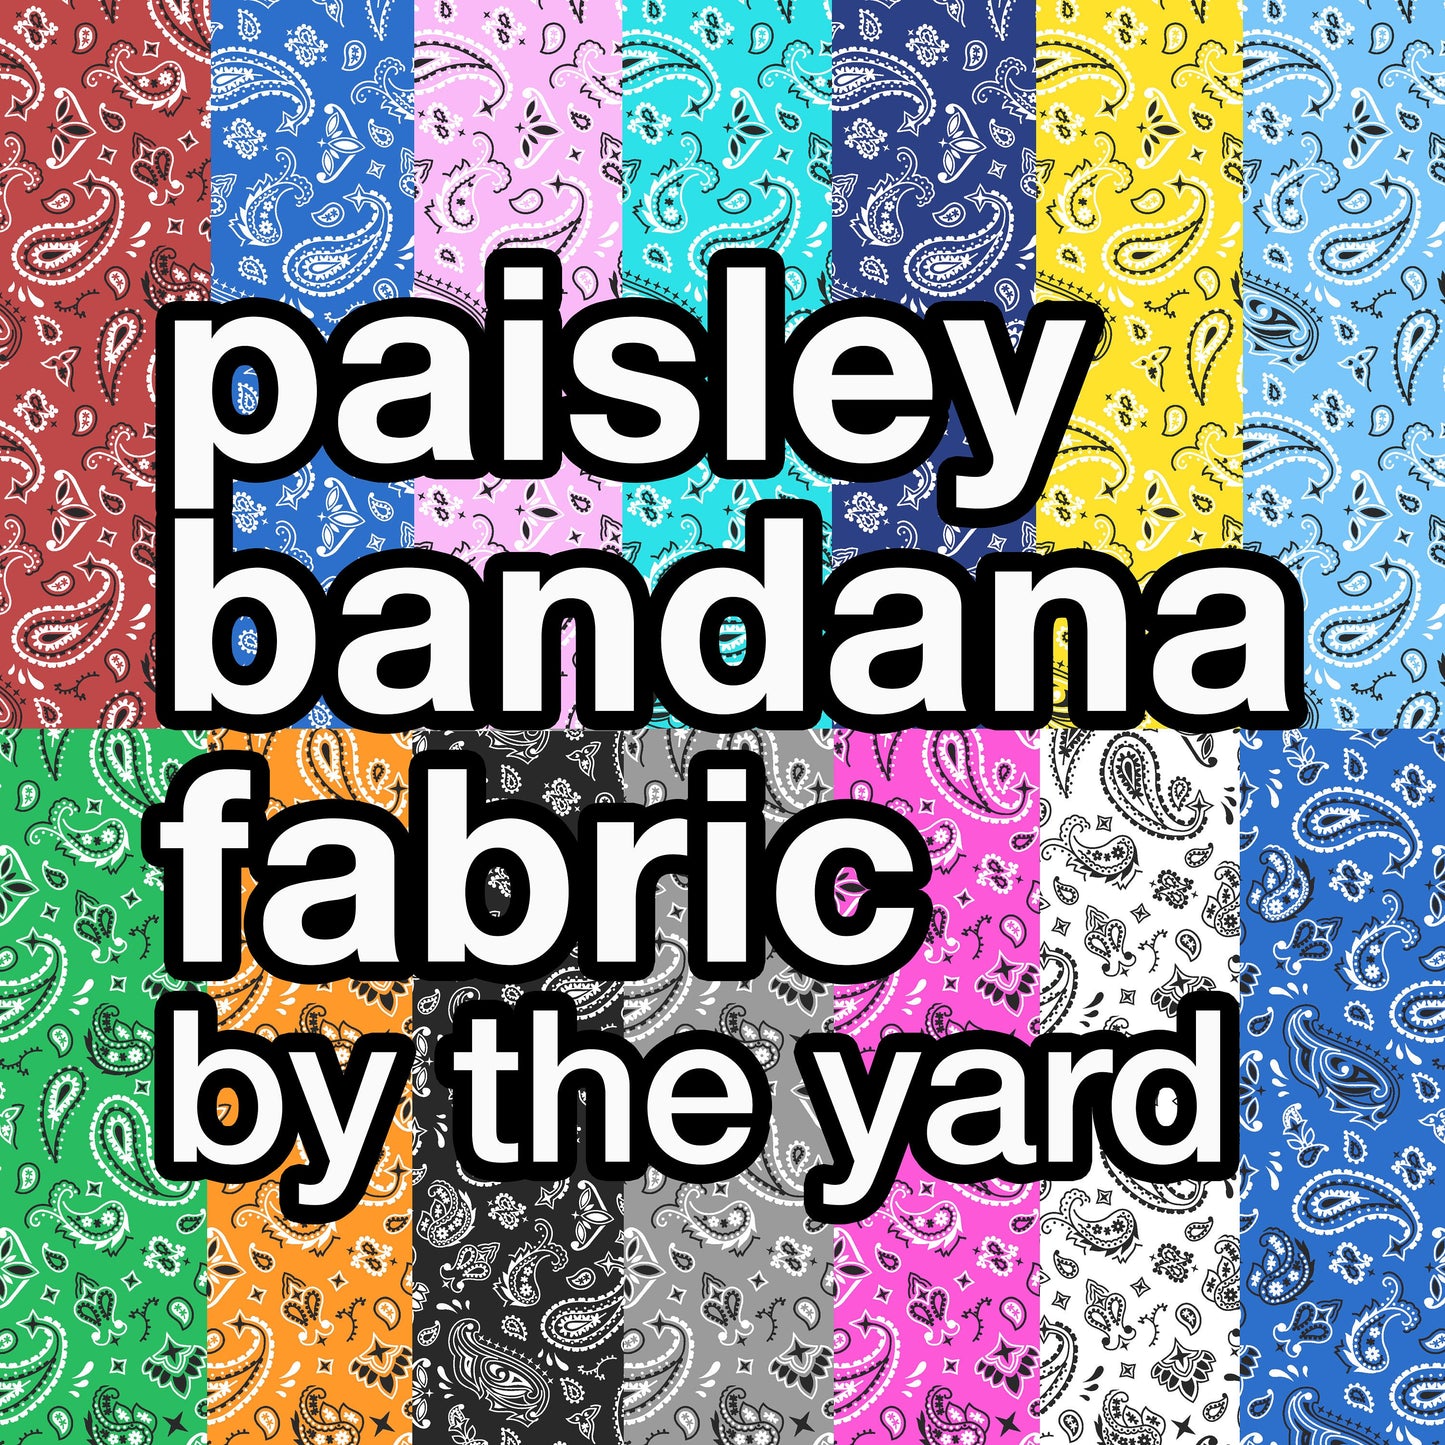 Bandana Paisley Fabric Print By the Yard, Choice of Colors for Boho Cowgirls and Cowboys